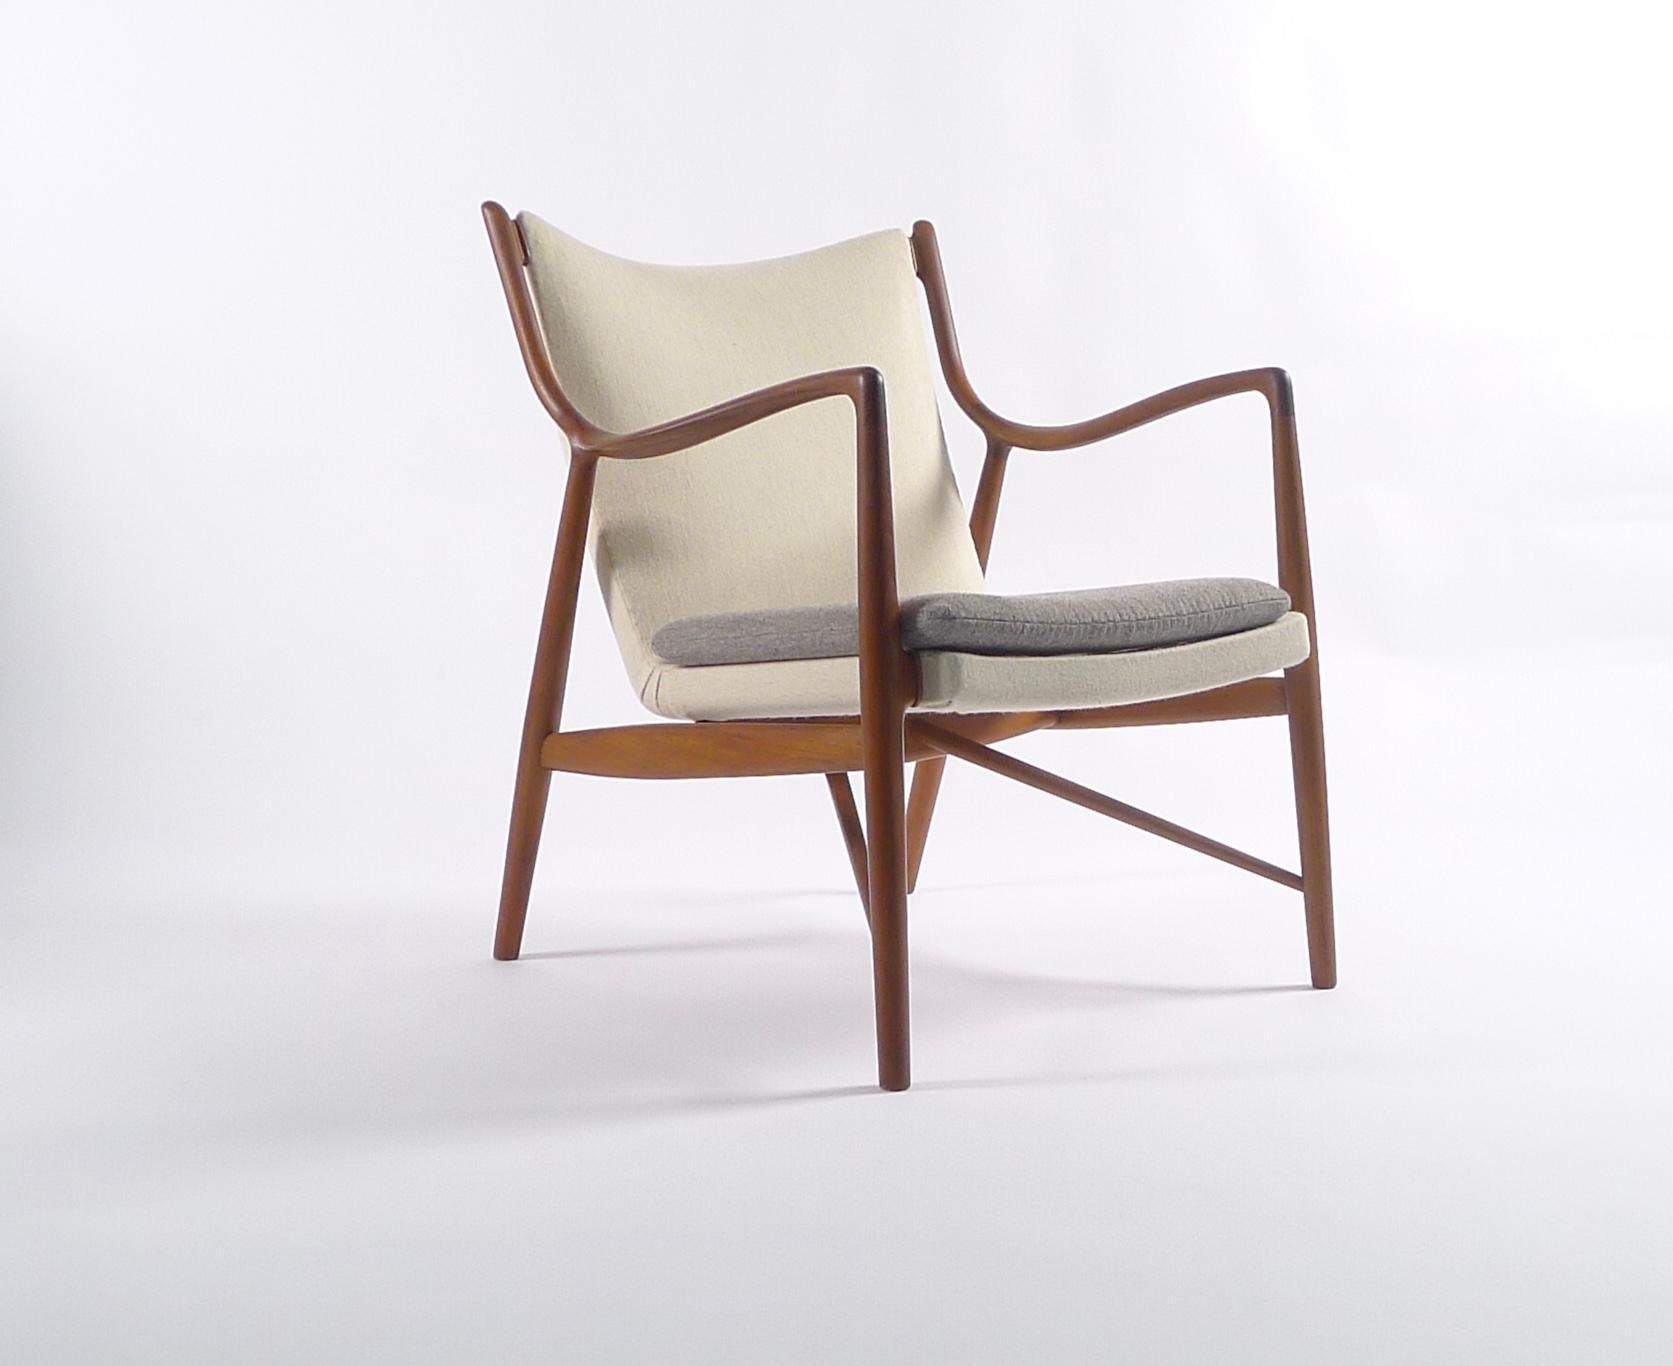 Finn Juhl NV45 teak armchair, original example made by Niels Vodder, design 1945.

In lovely condition, with recent upholstery in oatmeal wool with pale grey cushion.